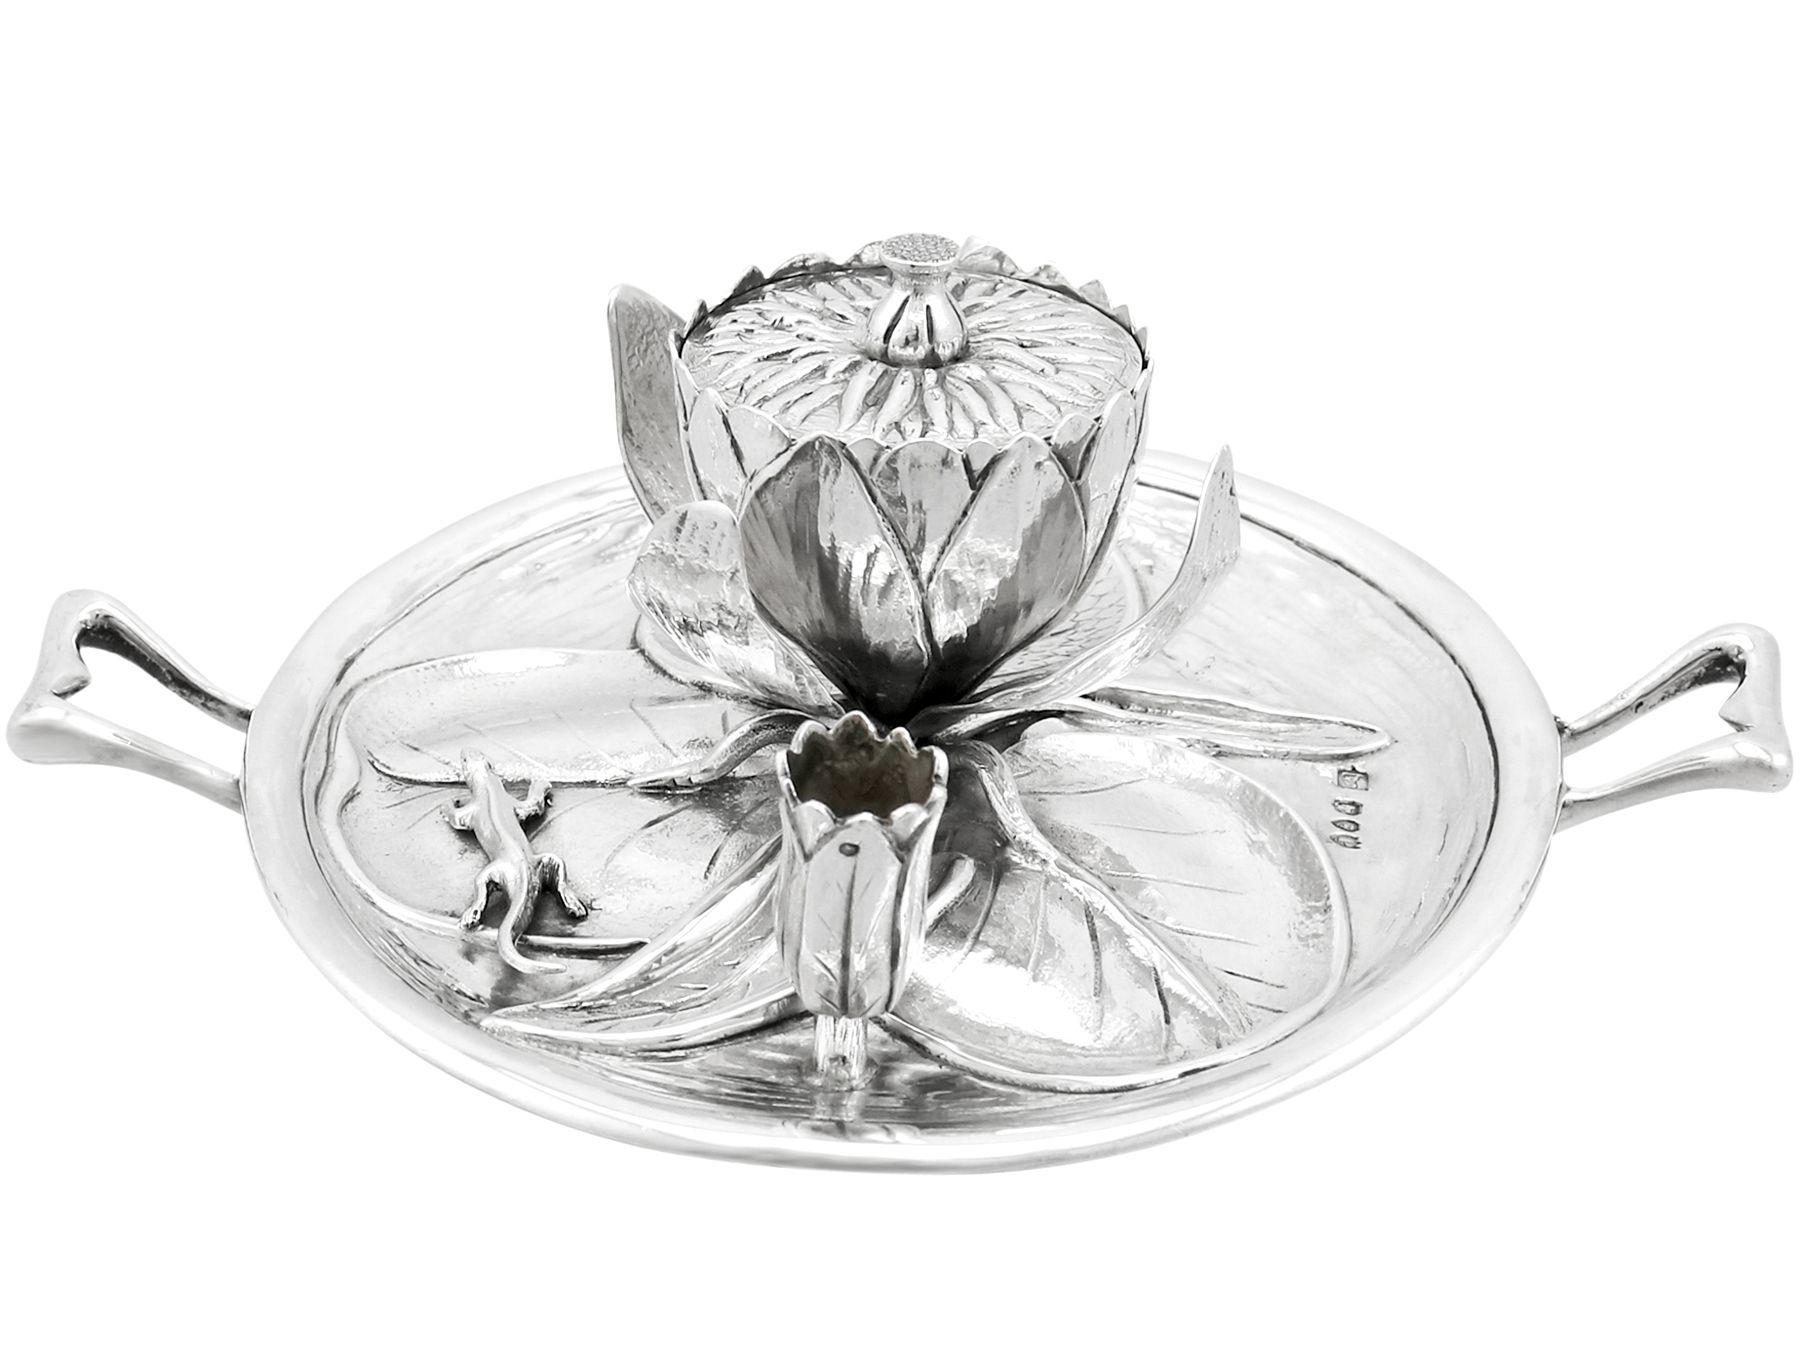 An exceptional, fine unusual and impressive antique Victorian English sterling silver inkwell in the form of a water lily; an addition to our ornamental silverware collection.

This exceptional antique Victorian cast sterling silver inkwell has